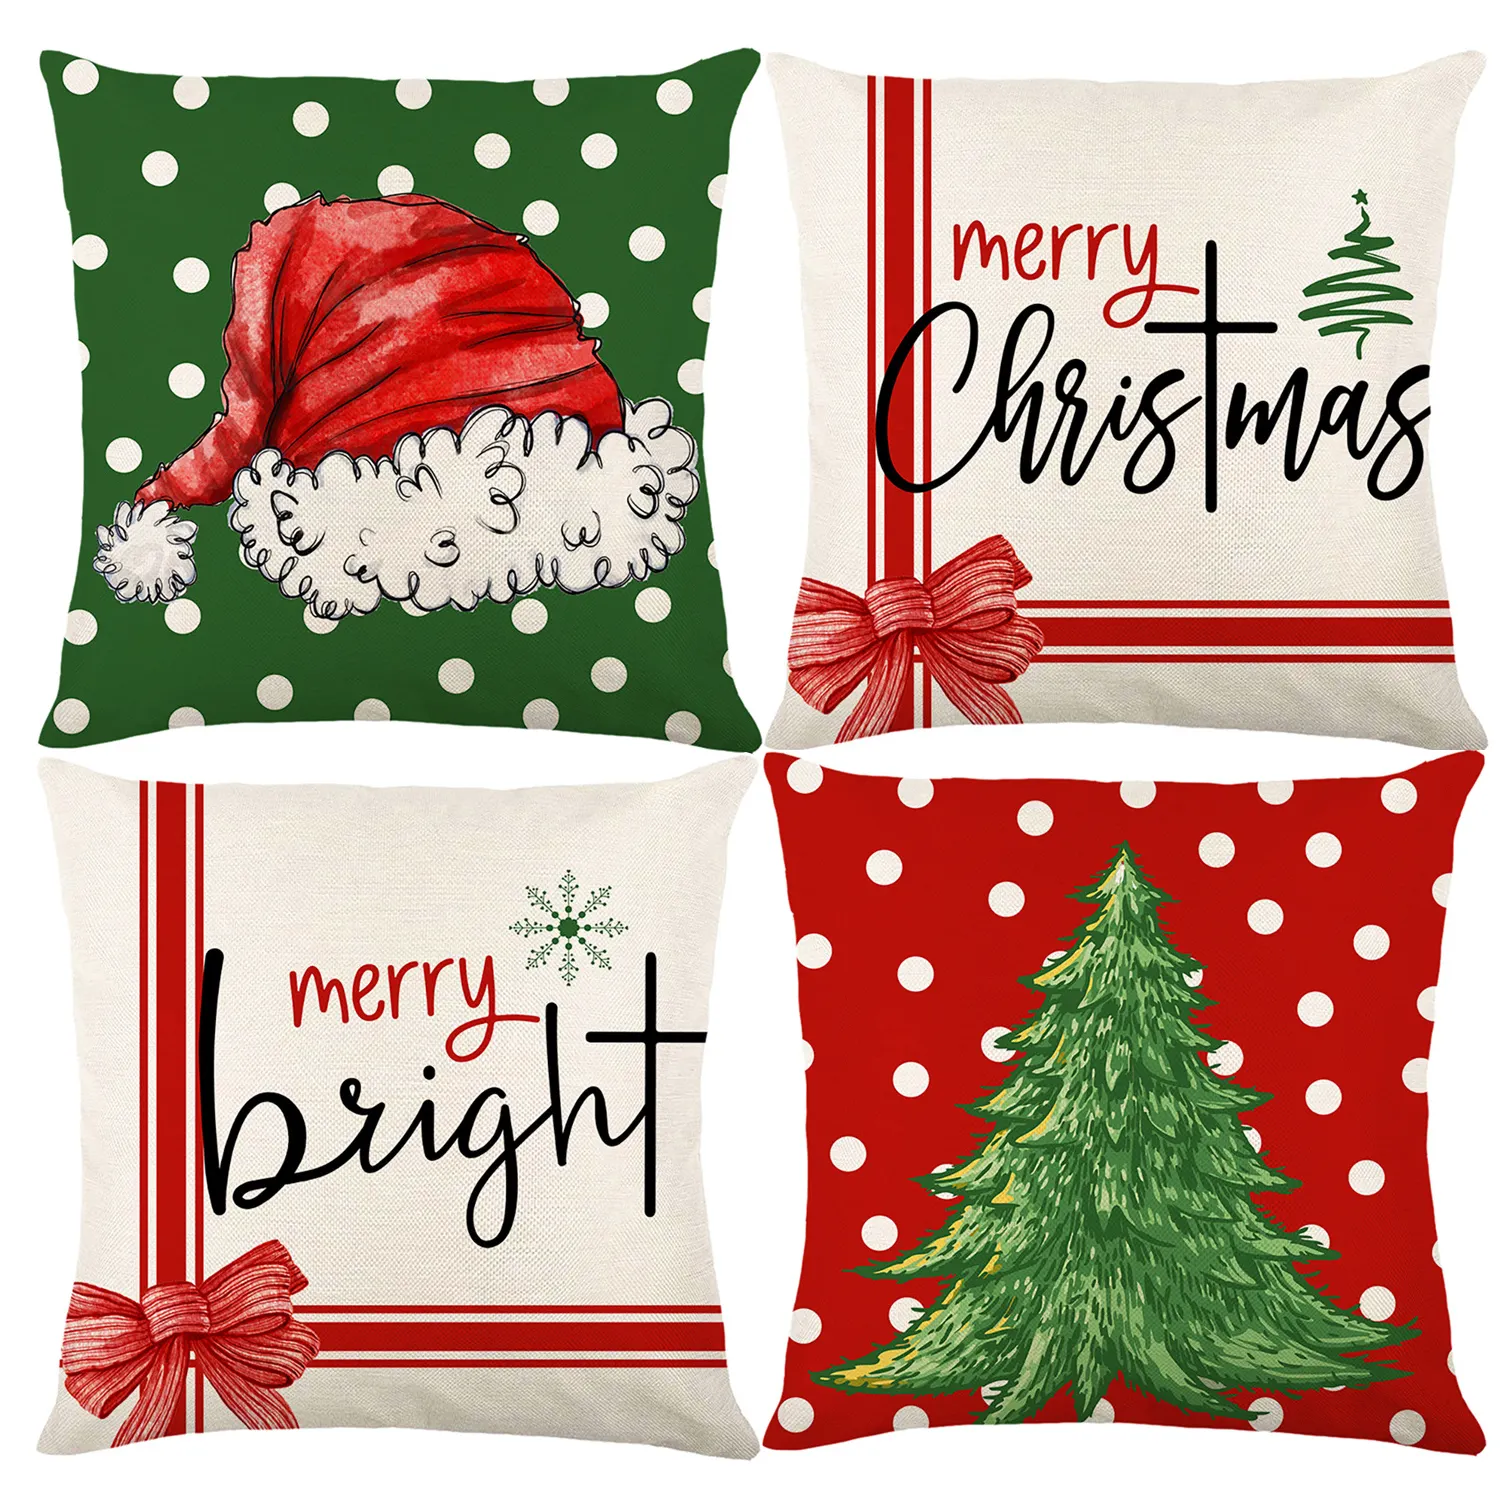 In Stock Christmas Decorations Throw Pillow Covers 18X18 inch Winter Holiday Cotton Linen Throw Christmas Pillow Cover